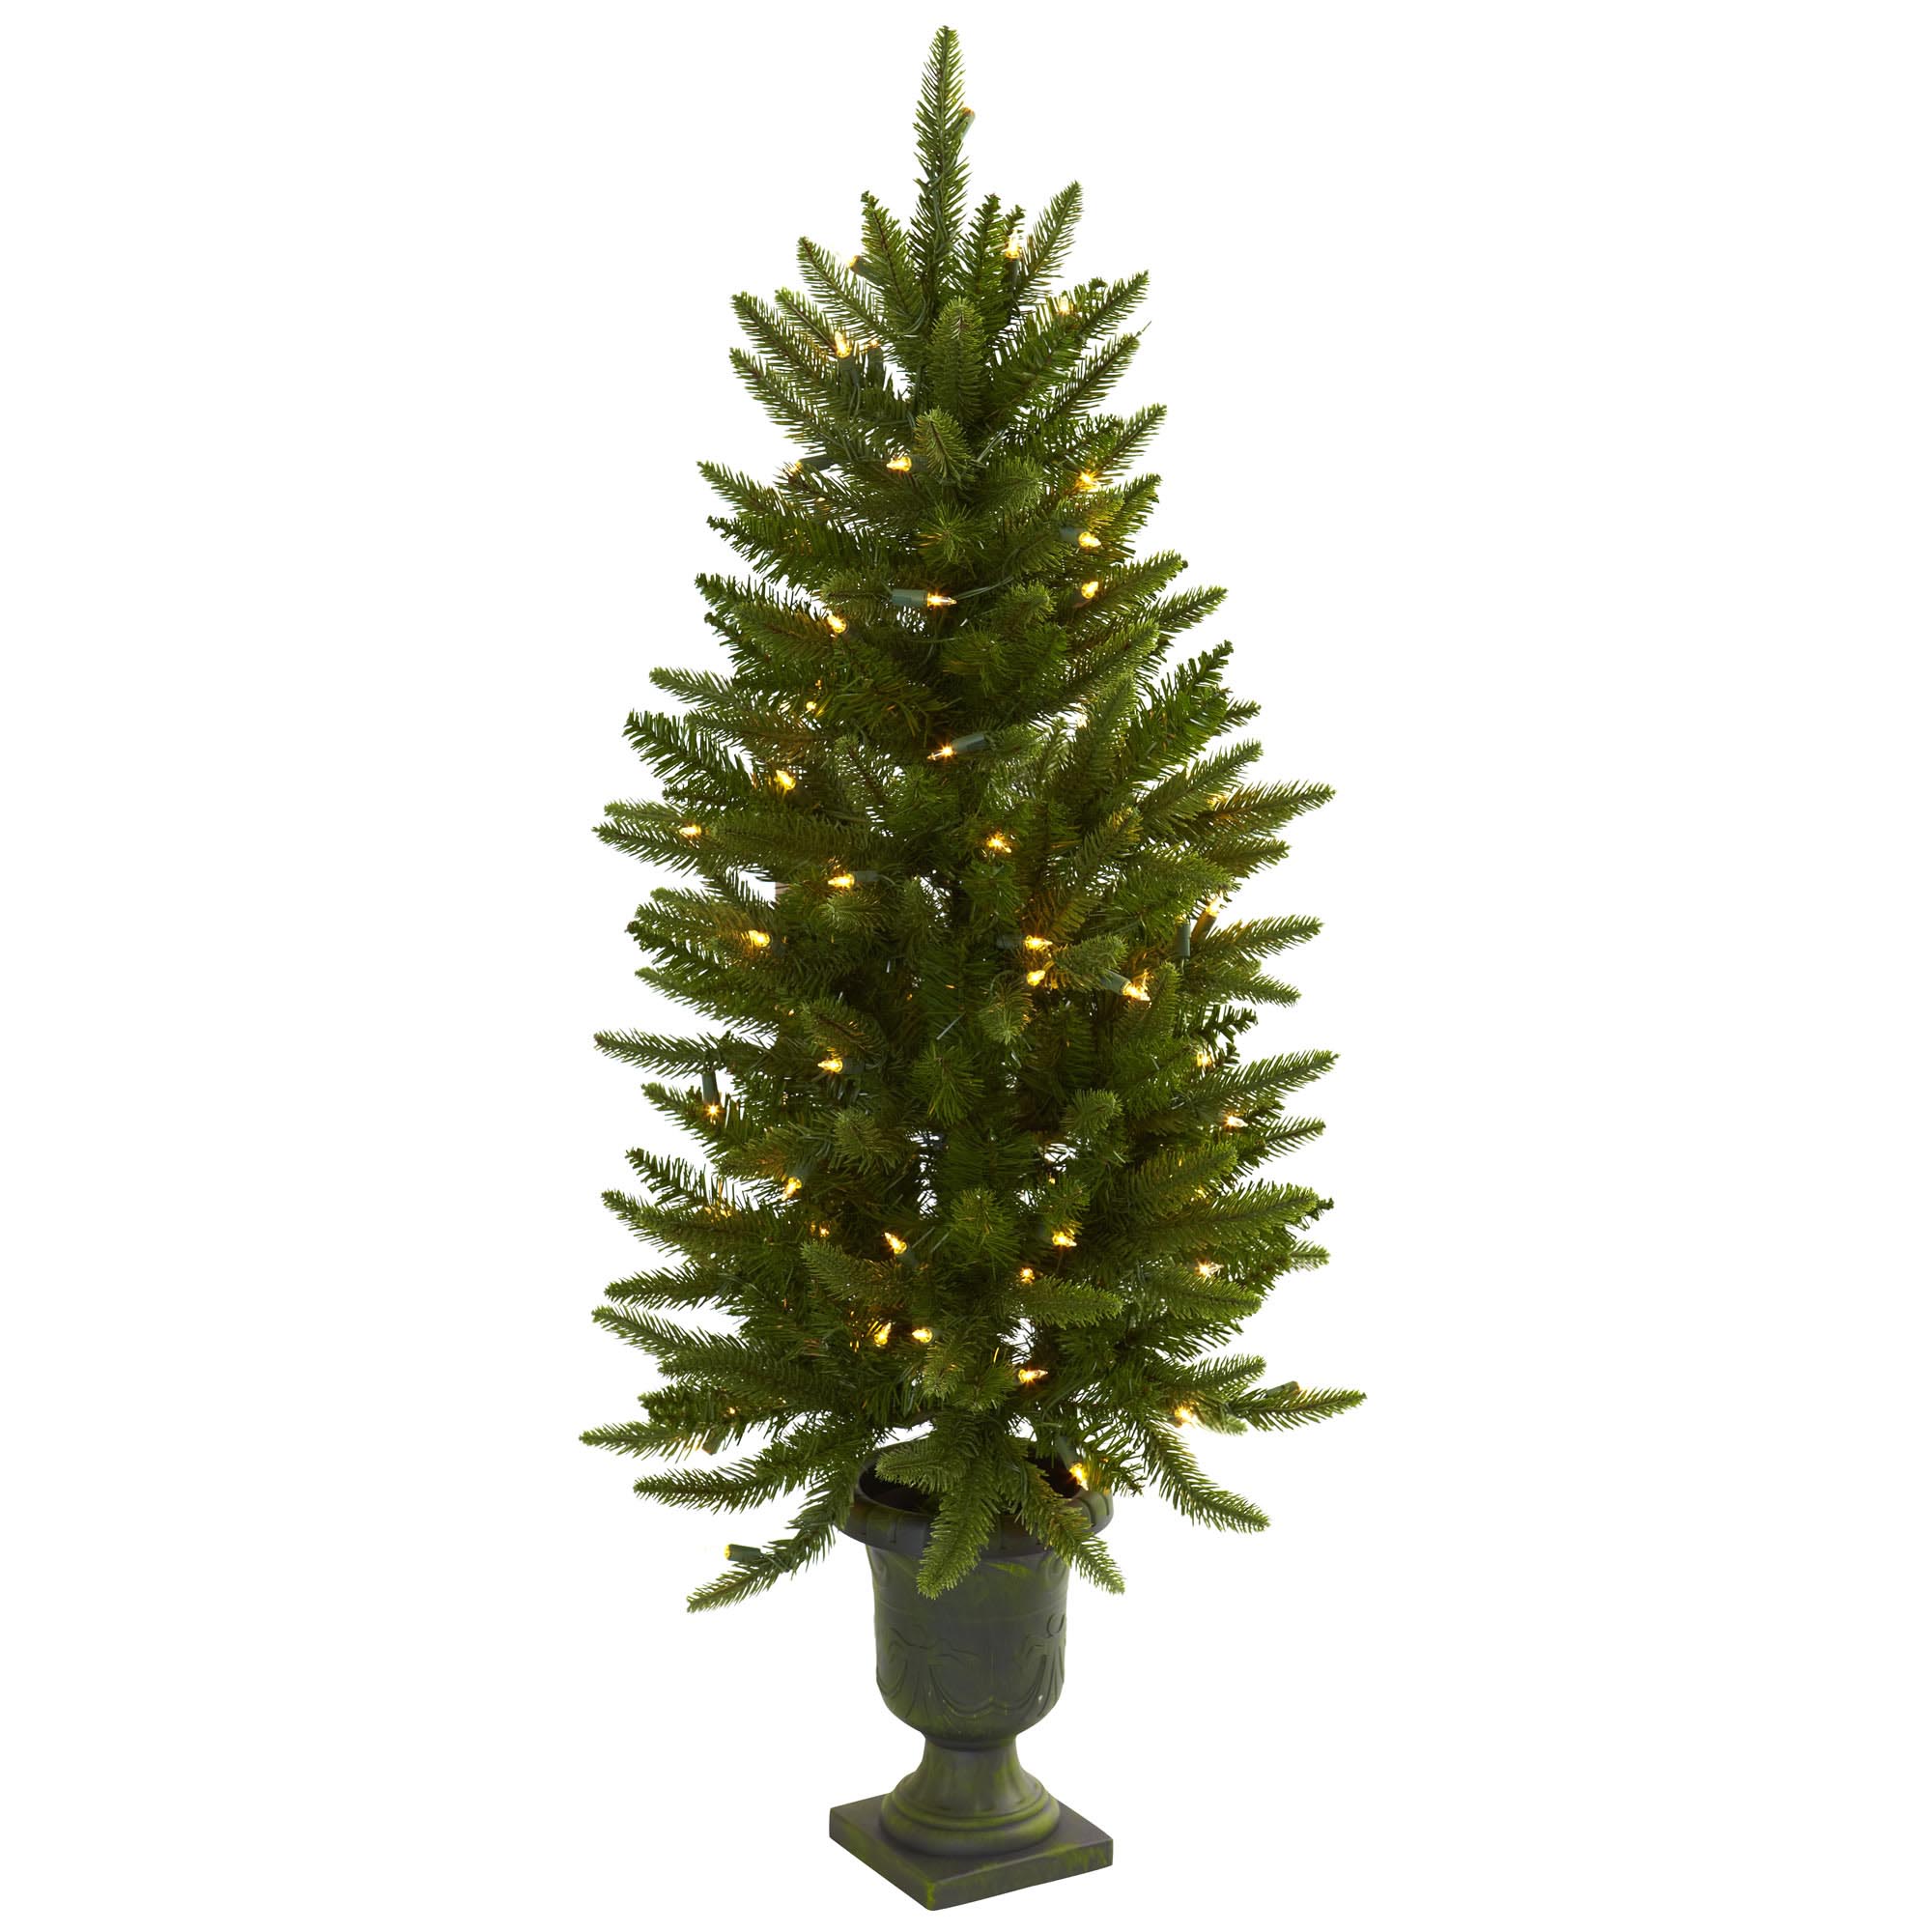 4 Foot Artificial Christmas Tree In Urn: Clear Lights